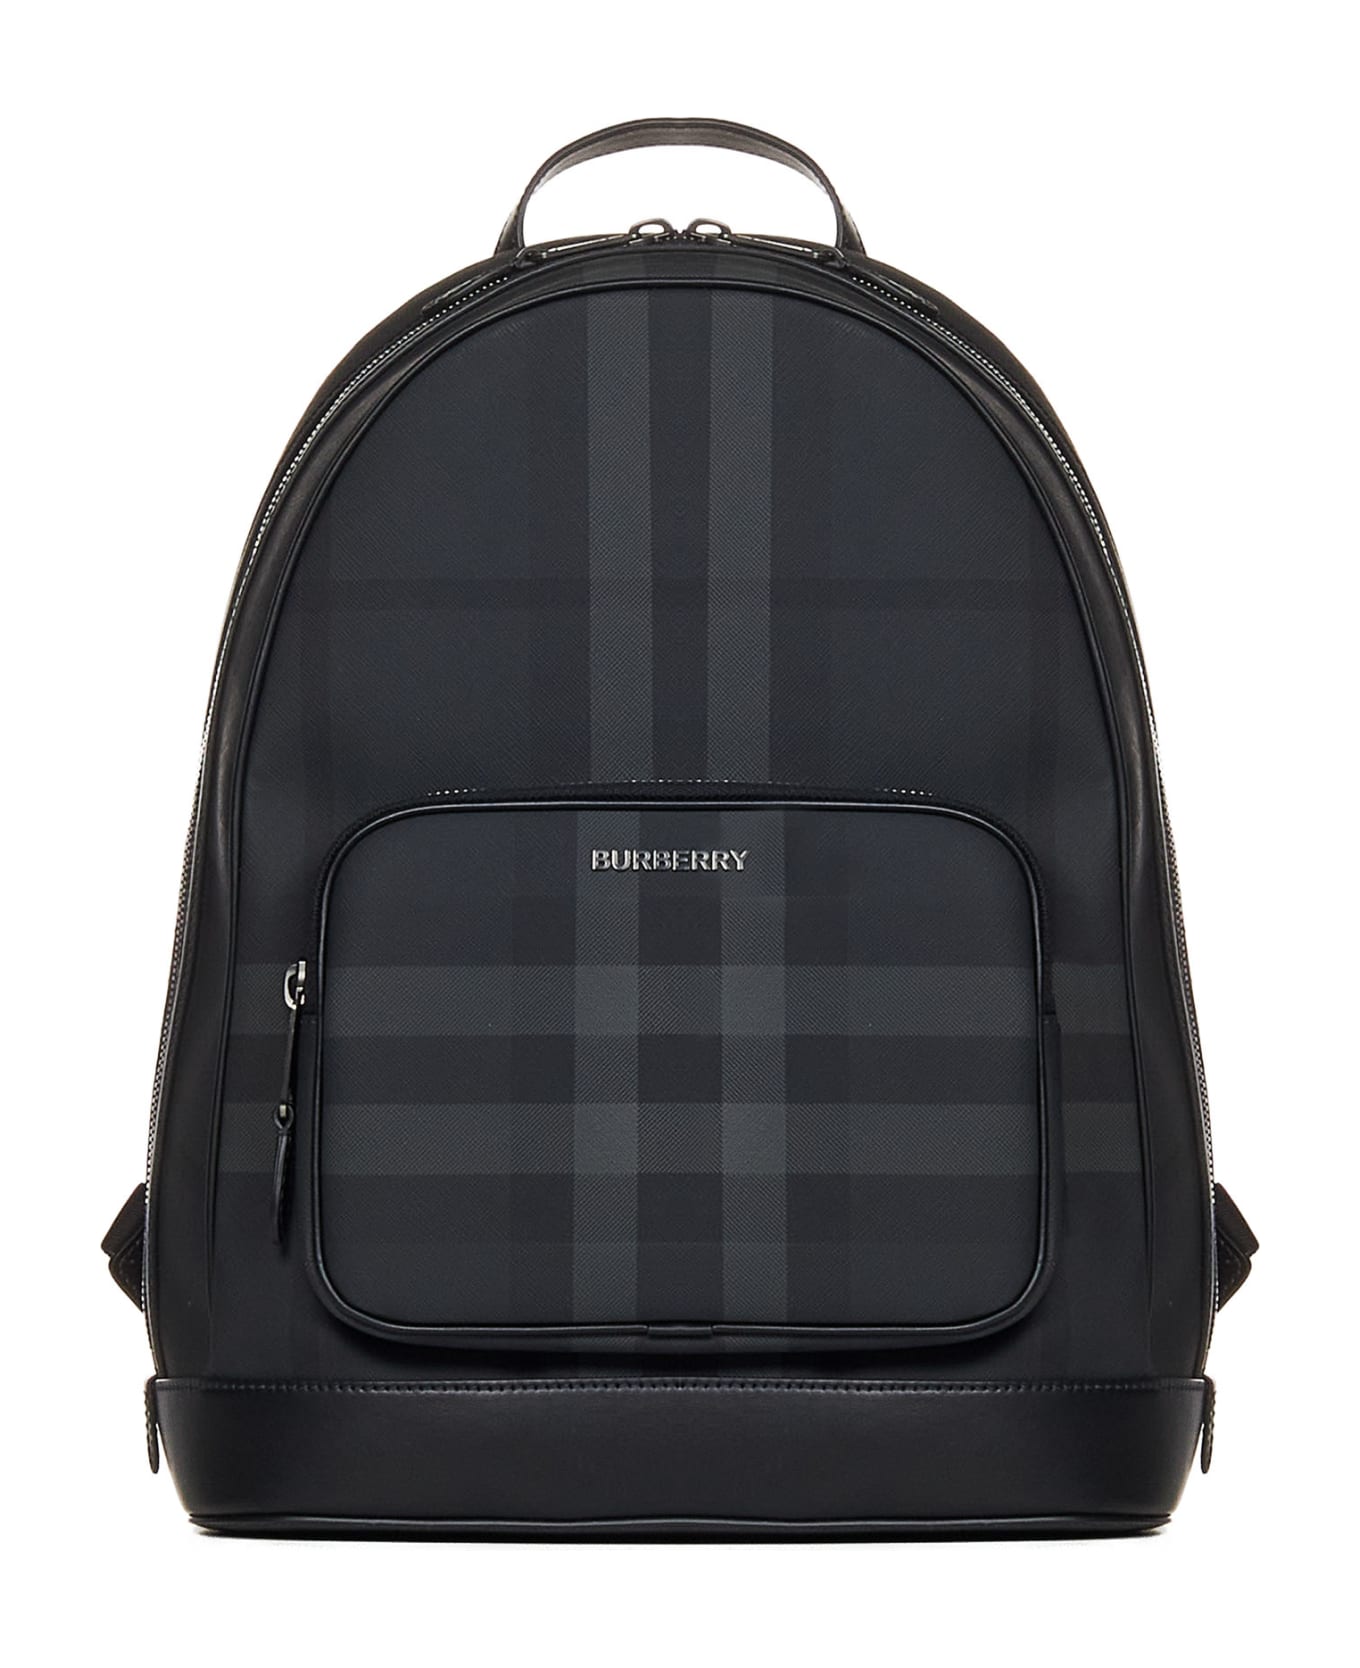 Burberry Check Backpack - A8800 バックパック